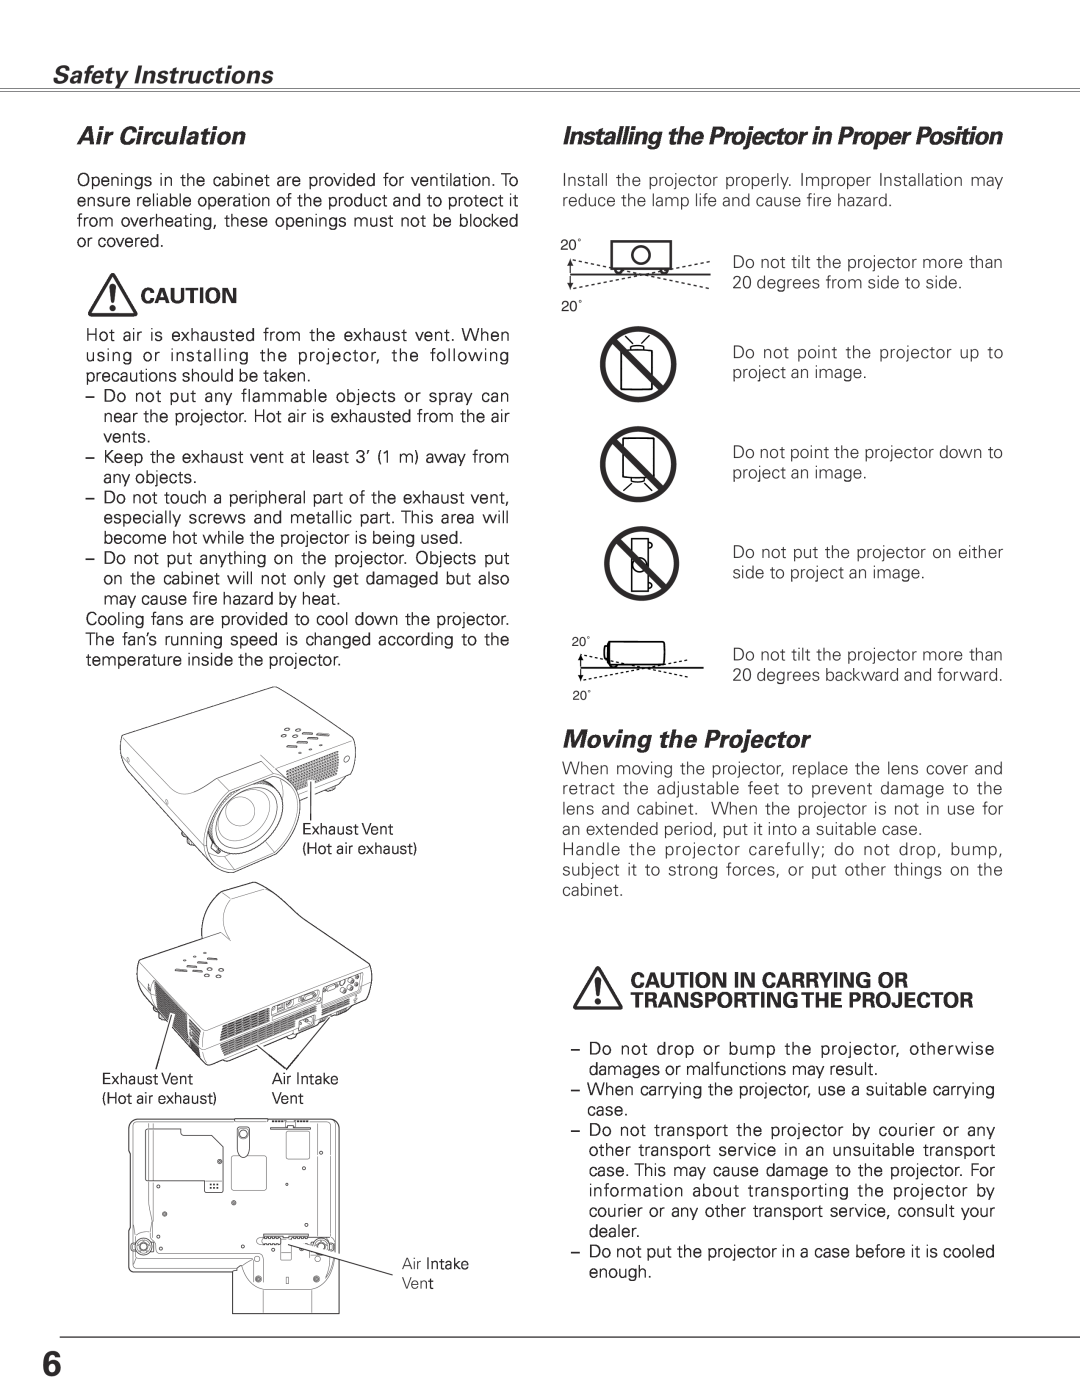 Sanyo PLC-XL45 Safety Instructions Air Circulation, Installing the Projector in Proper Position, Moving the Projector 